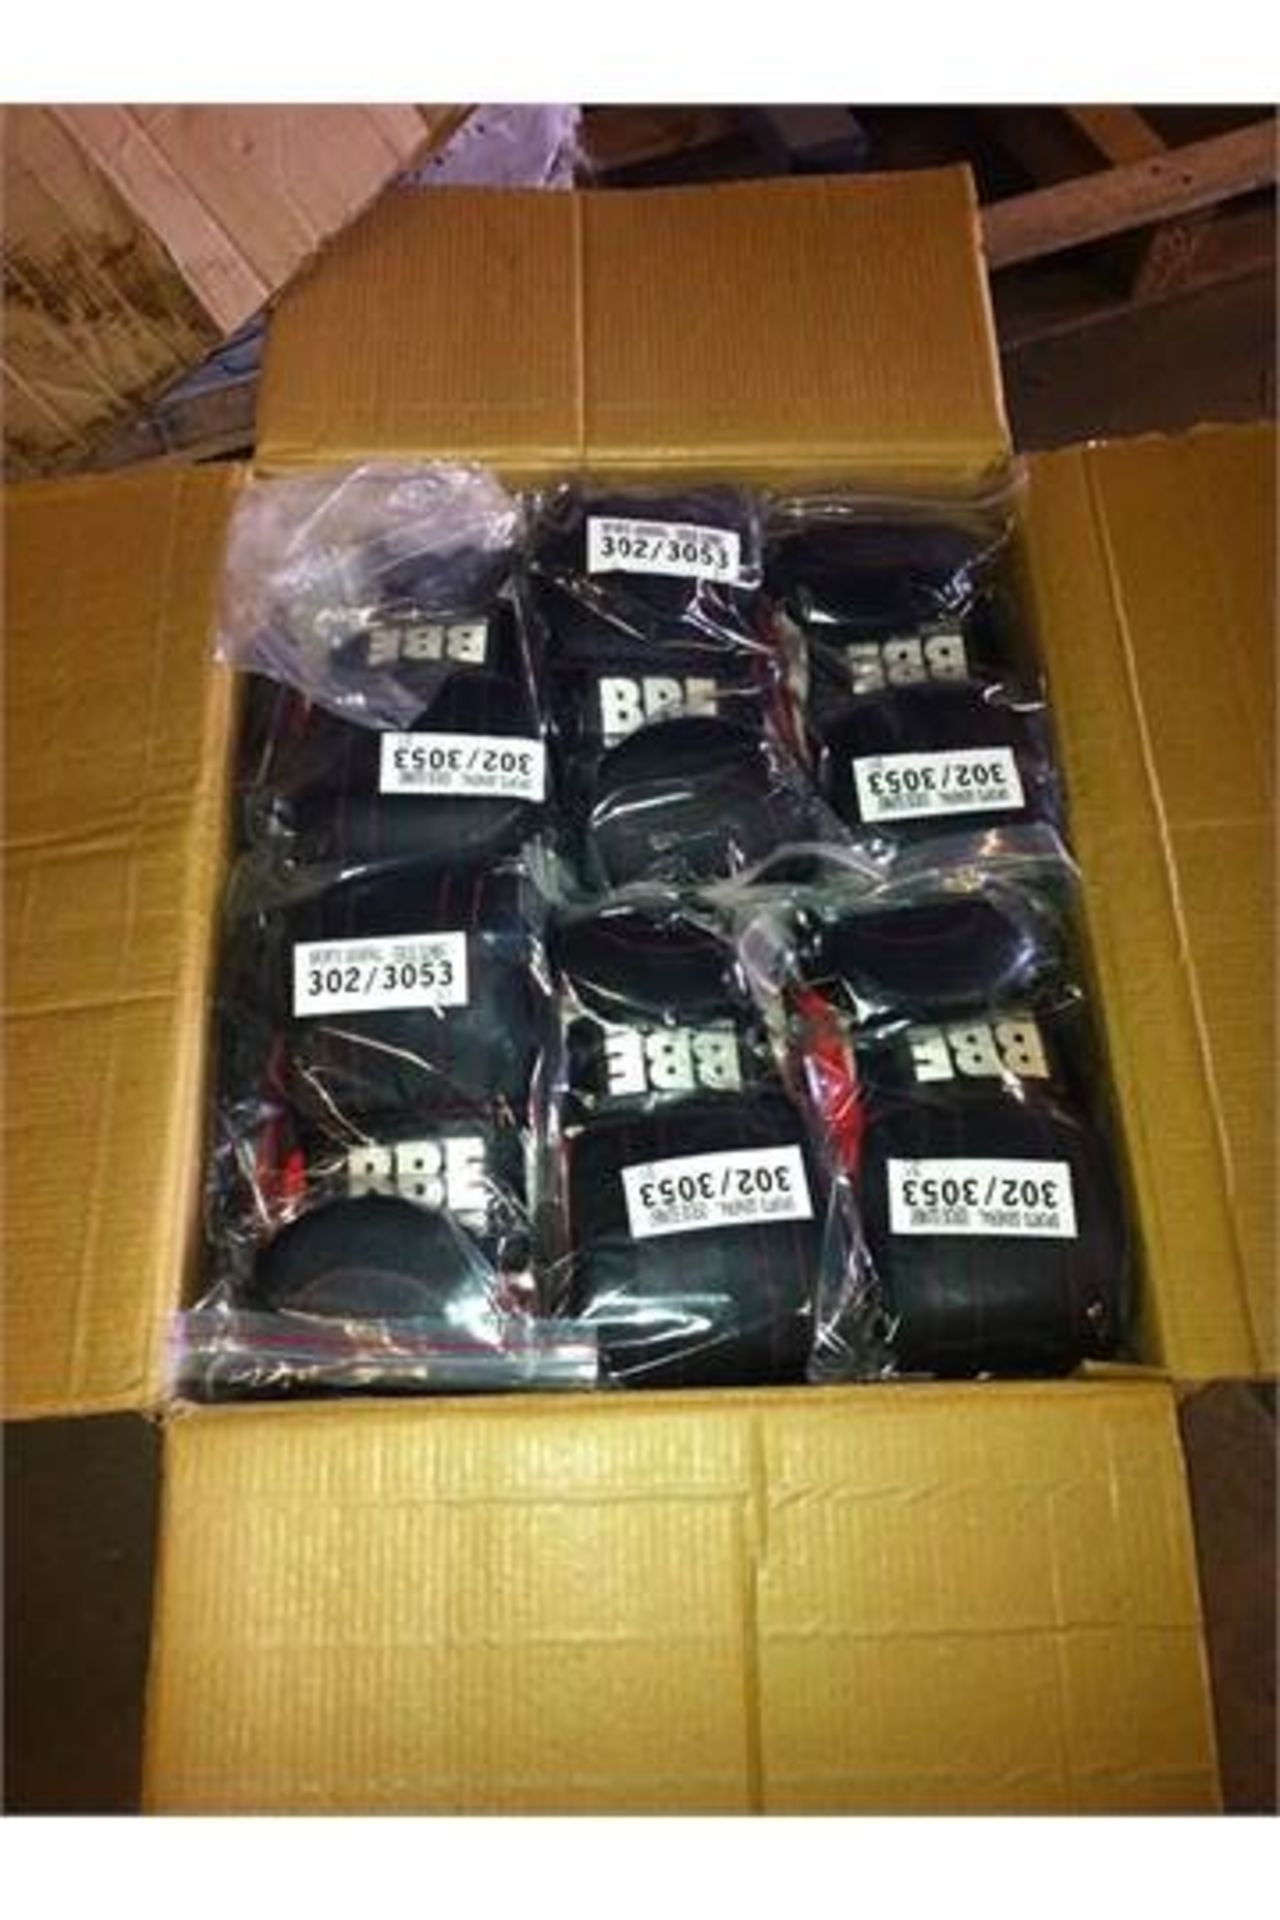 4 x Boxes of BBE Boxing Gloves - 125 per Box - Image 2 of 2